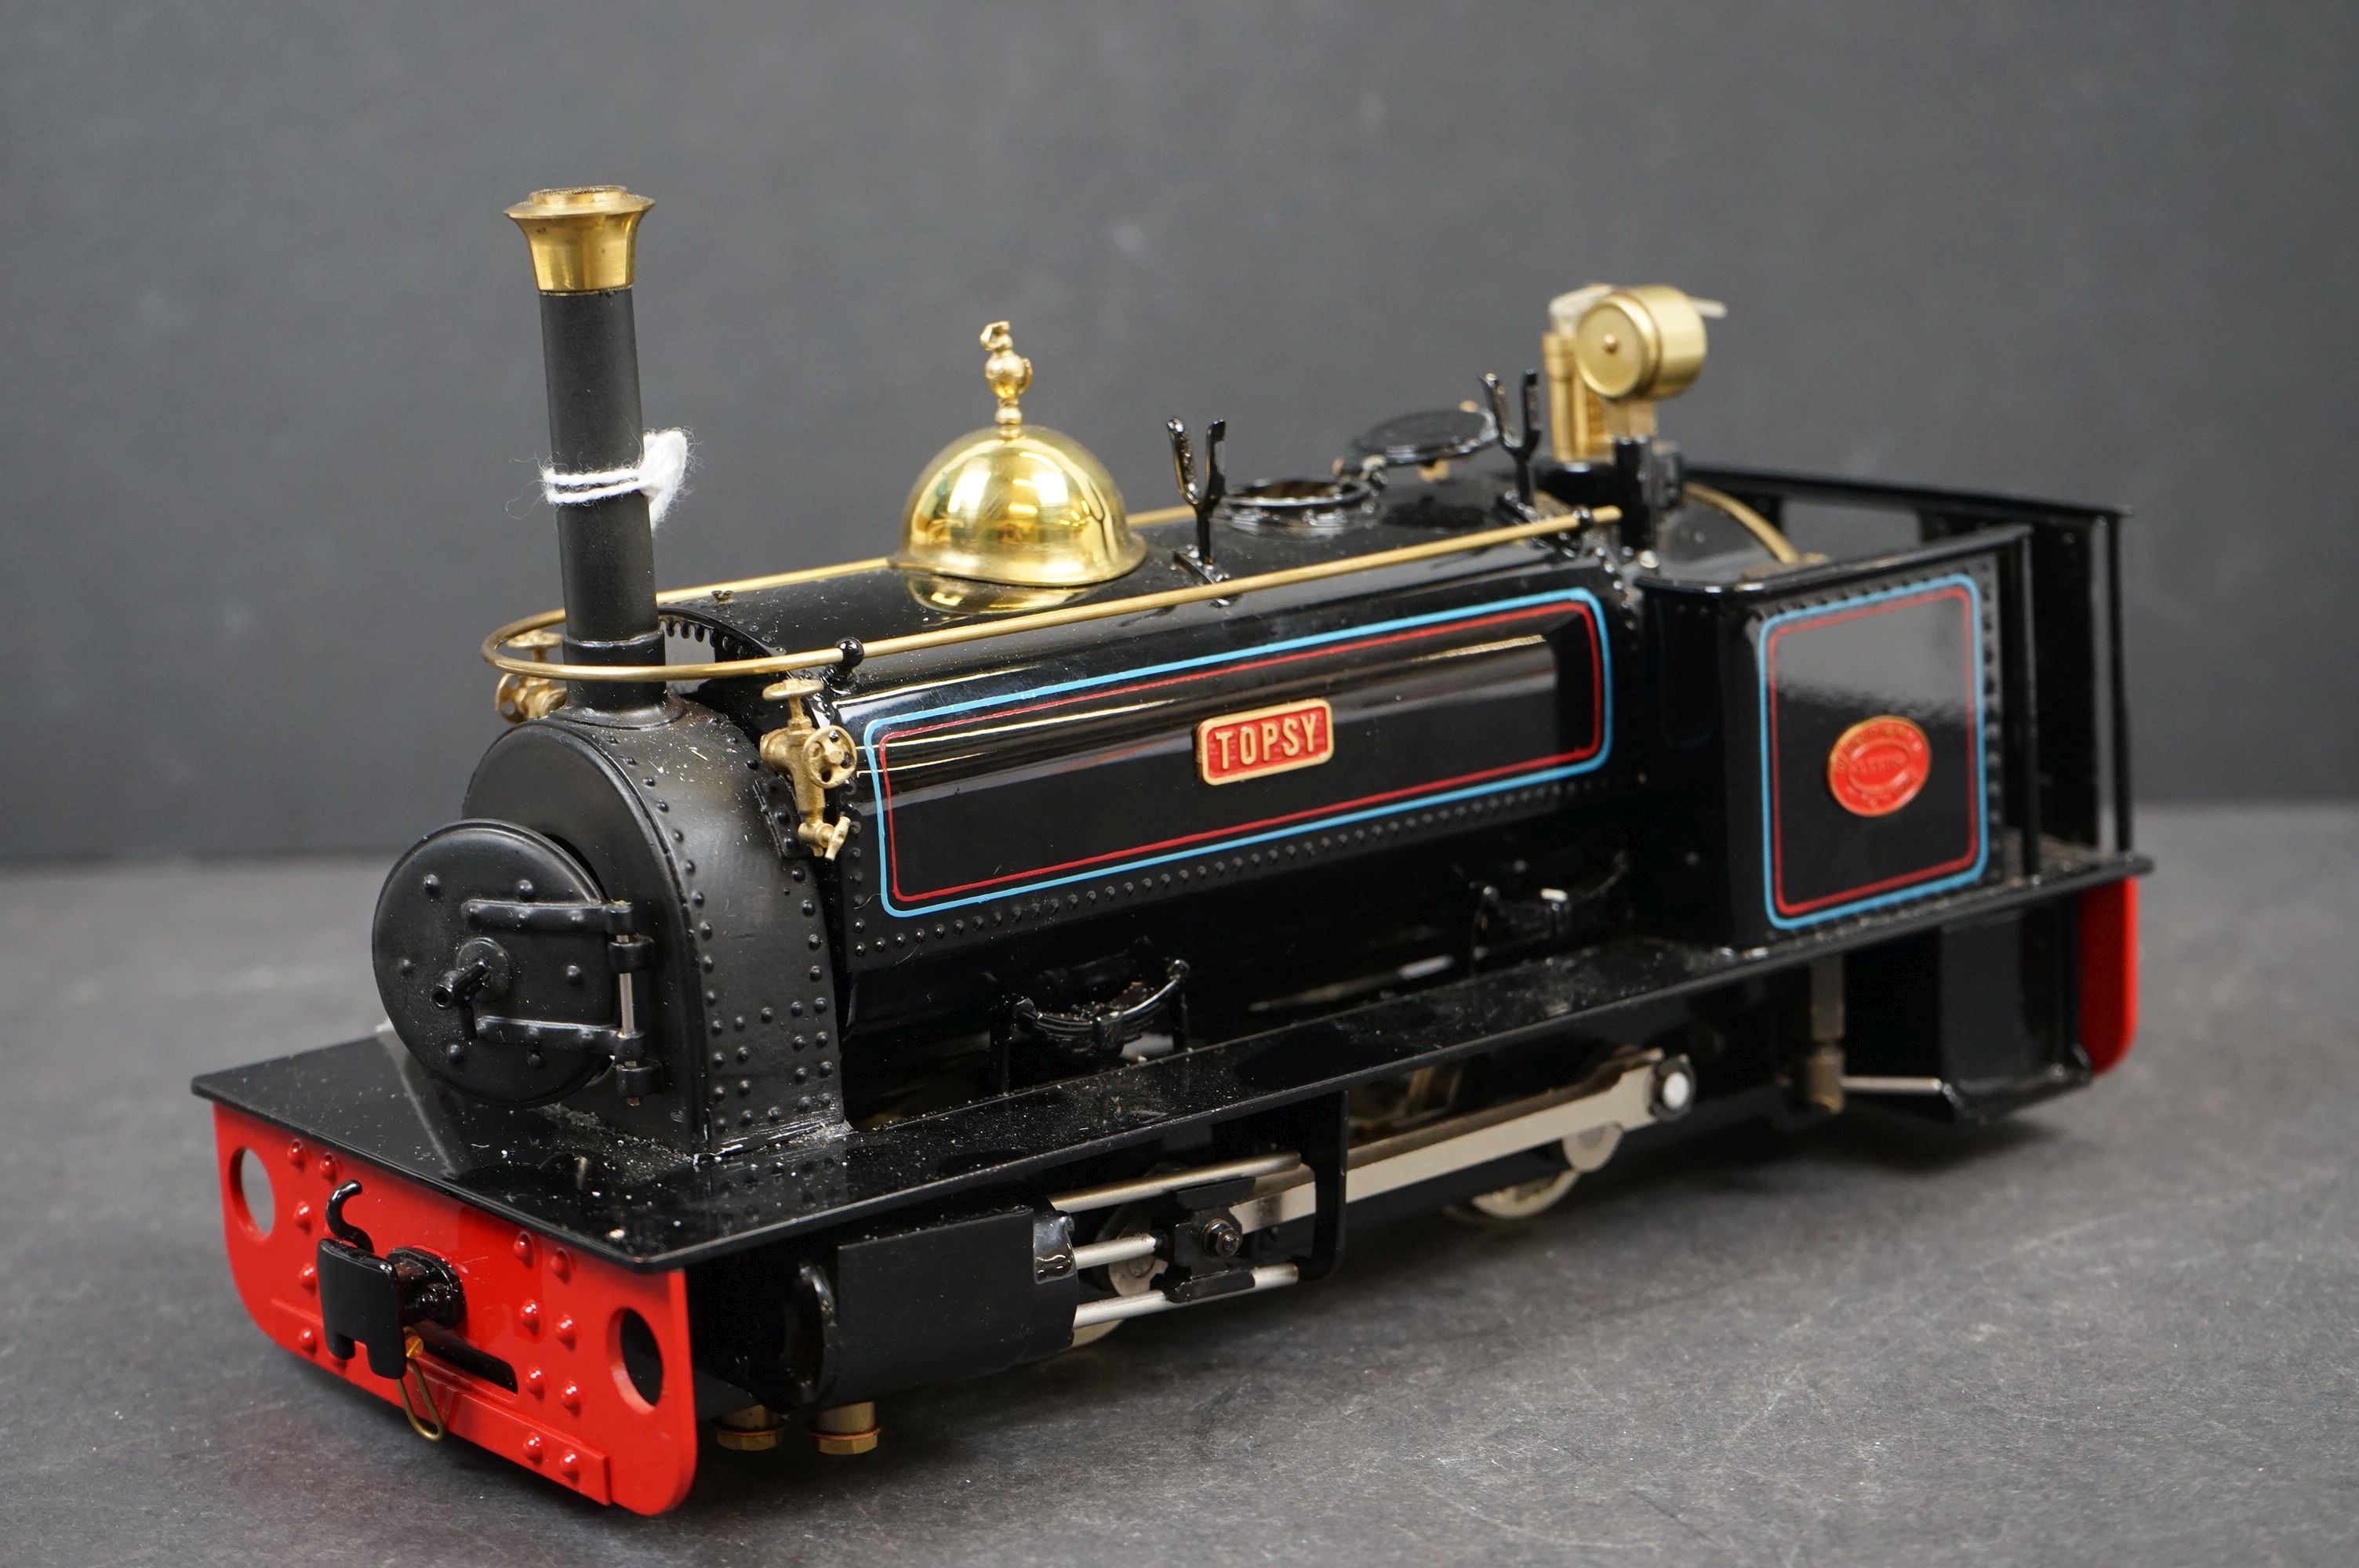 Finescale Engineering Co O Gauge Live Steam 0-4-0 Saddle Tank Locomotive 'Topsy' in black livery, - Image 3 of 7